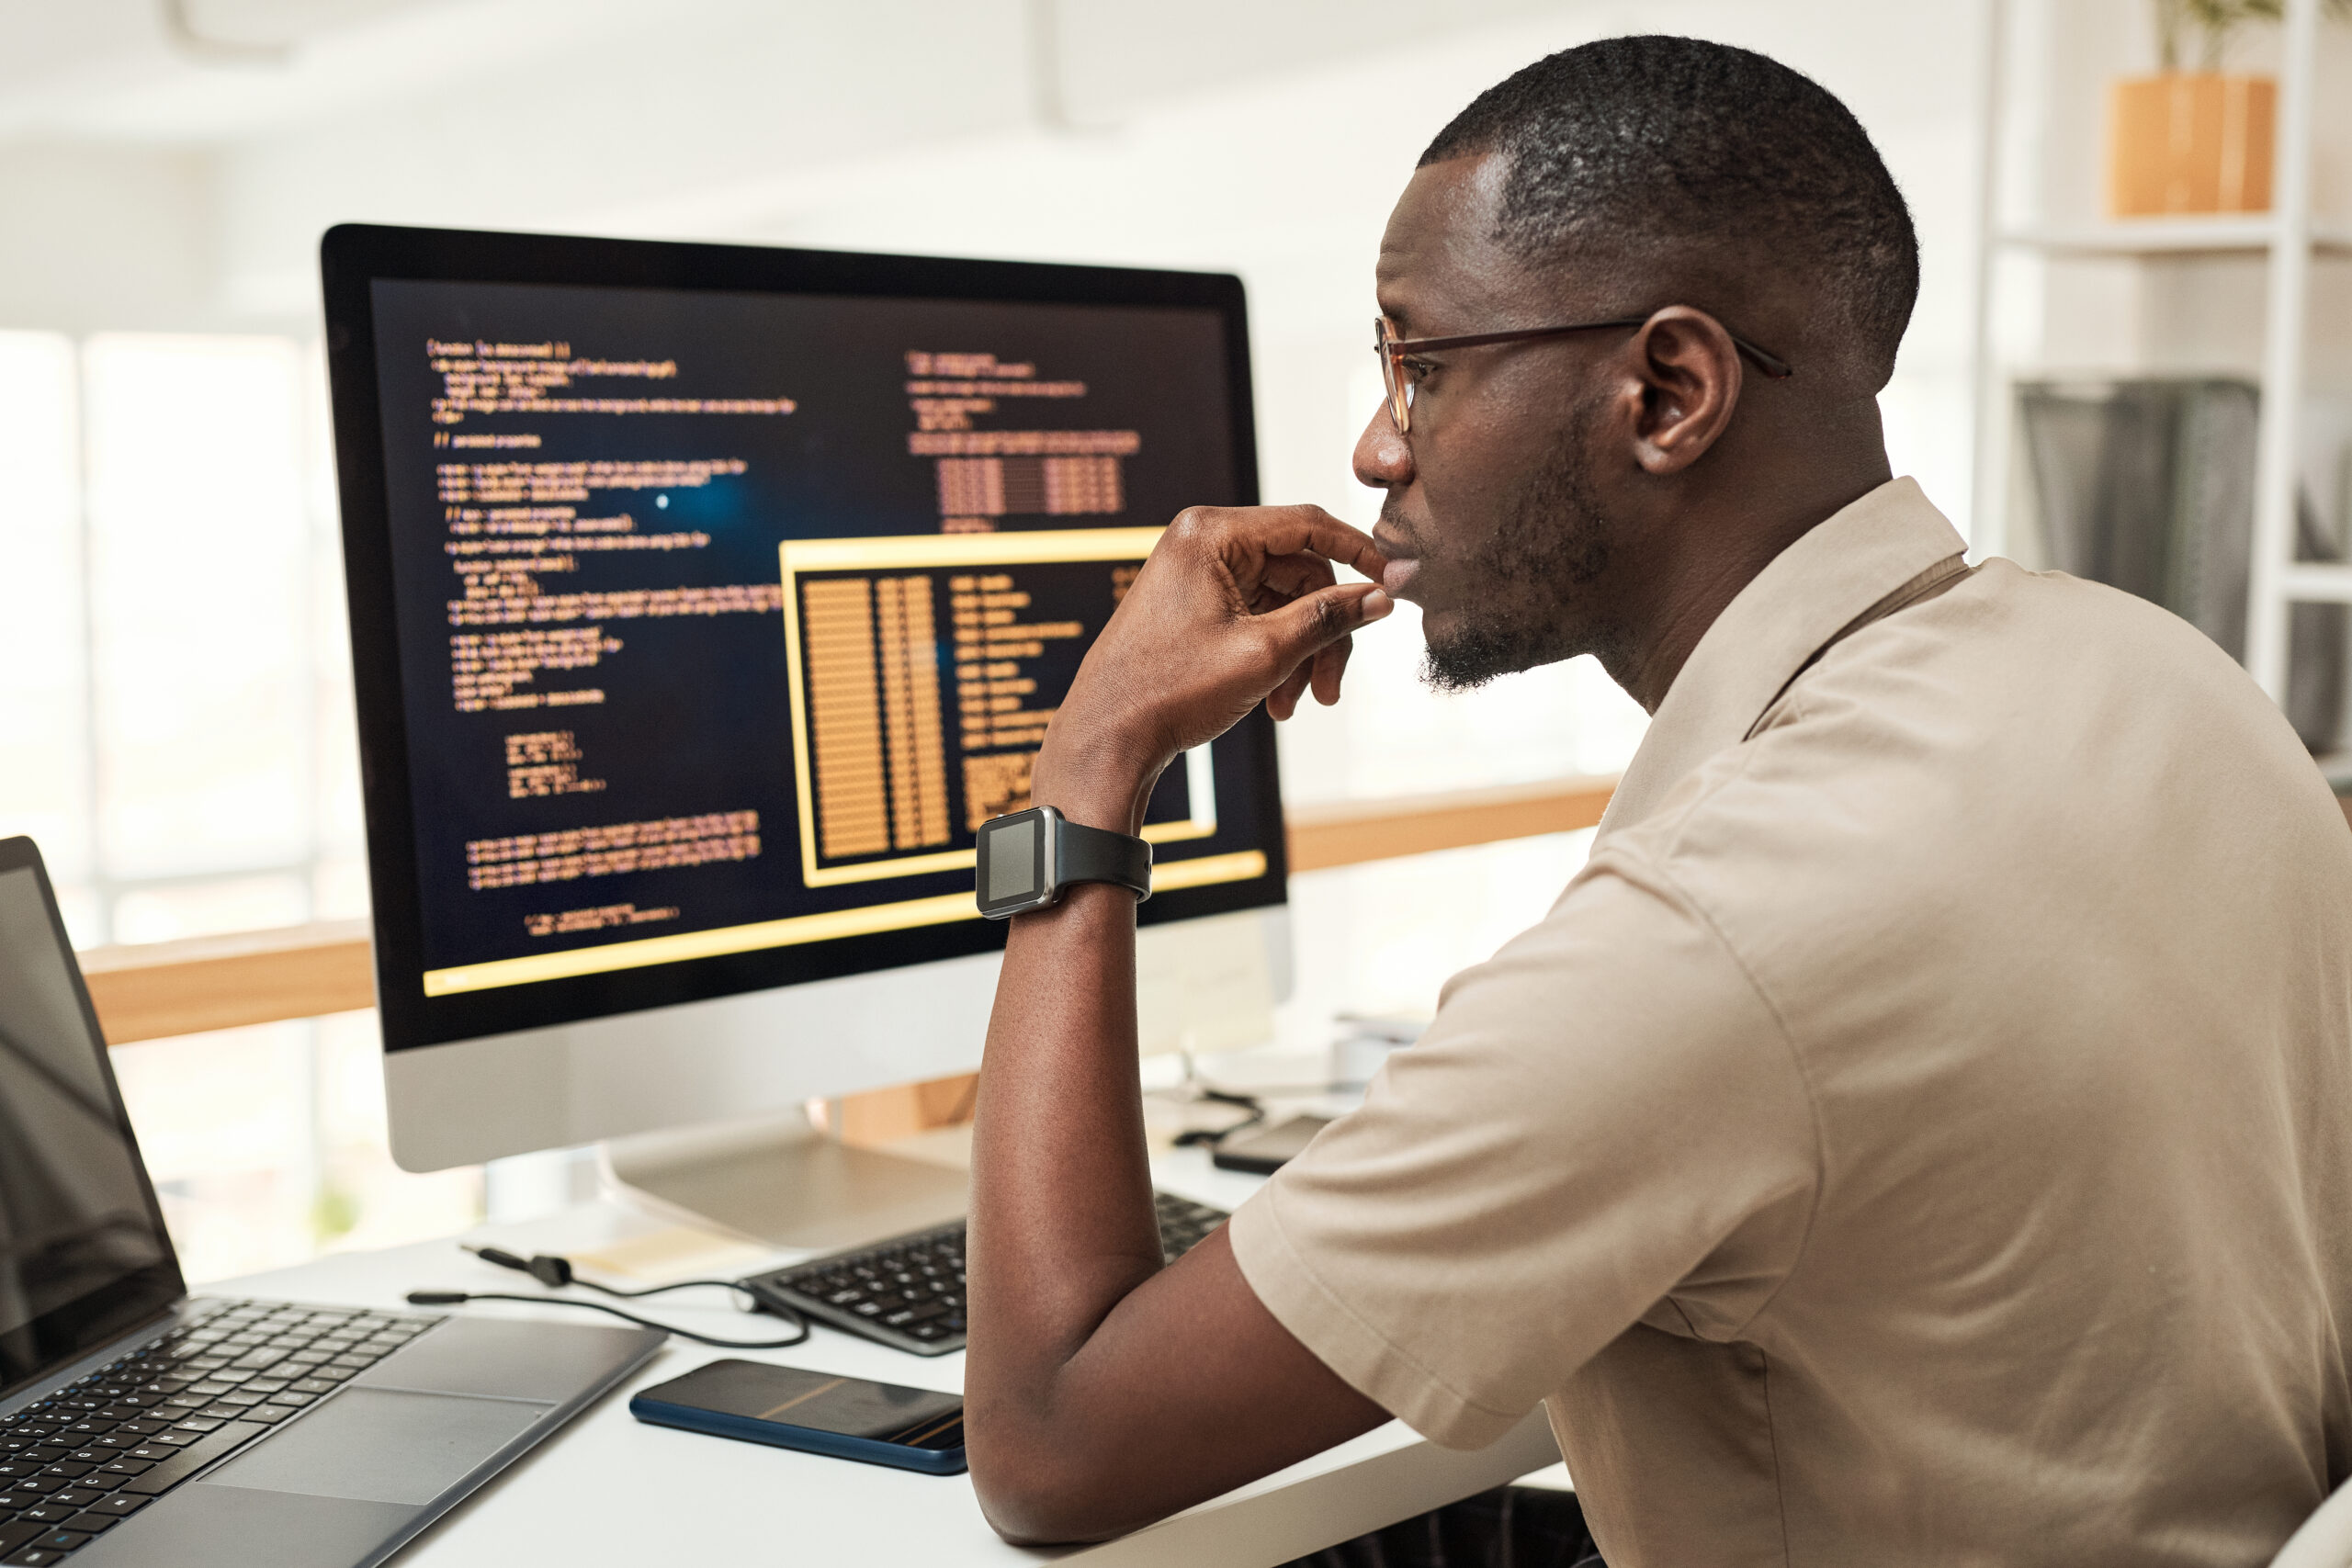 Cover image for the content on 'Freedom and control in using Internal Developer Platforms,' featuring a man in front of a computer screen filled with code.